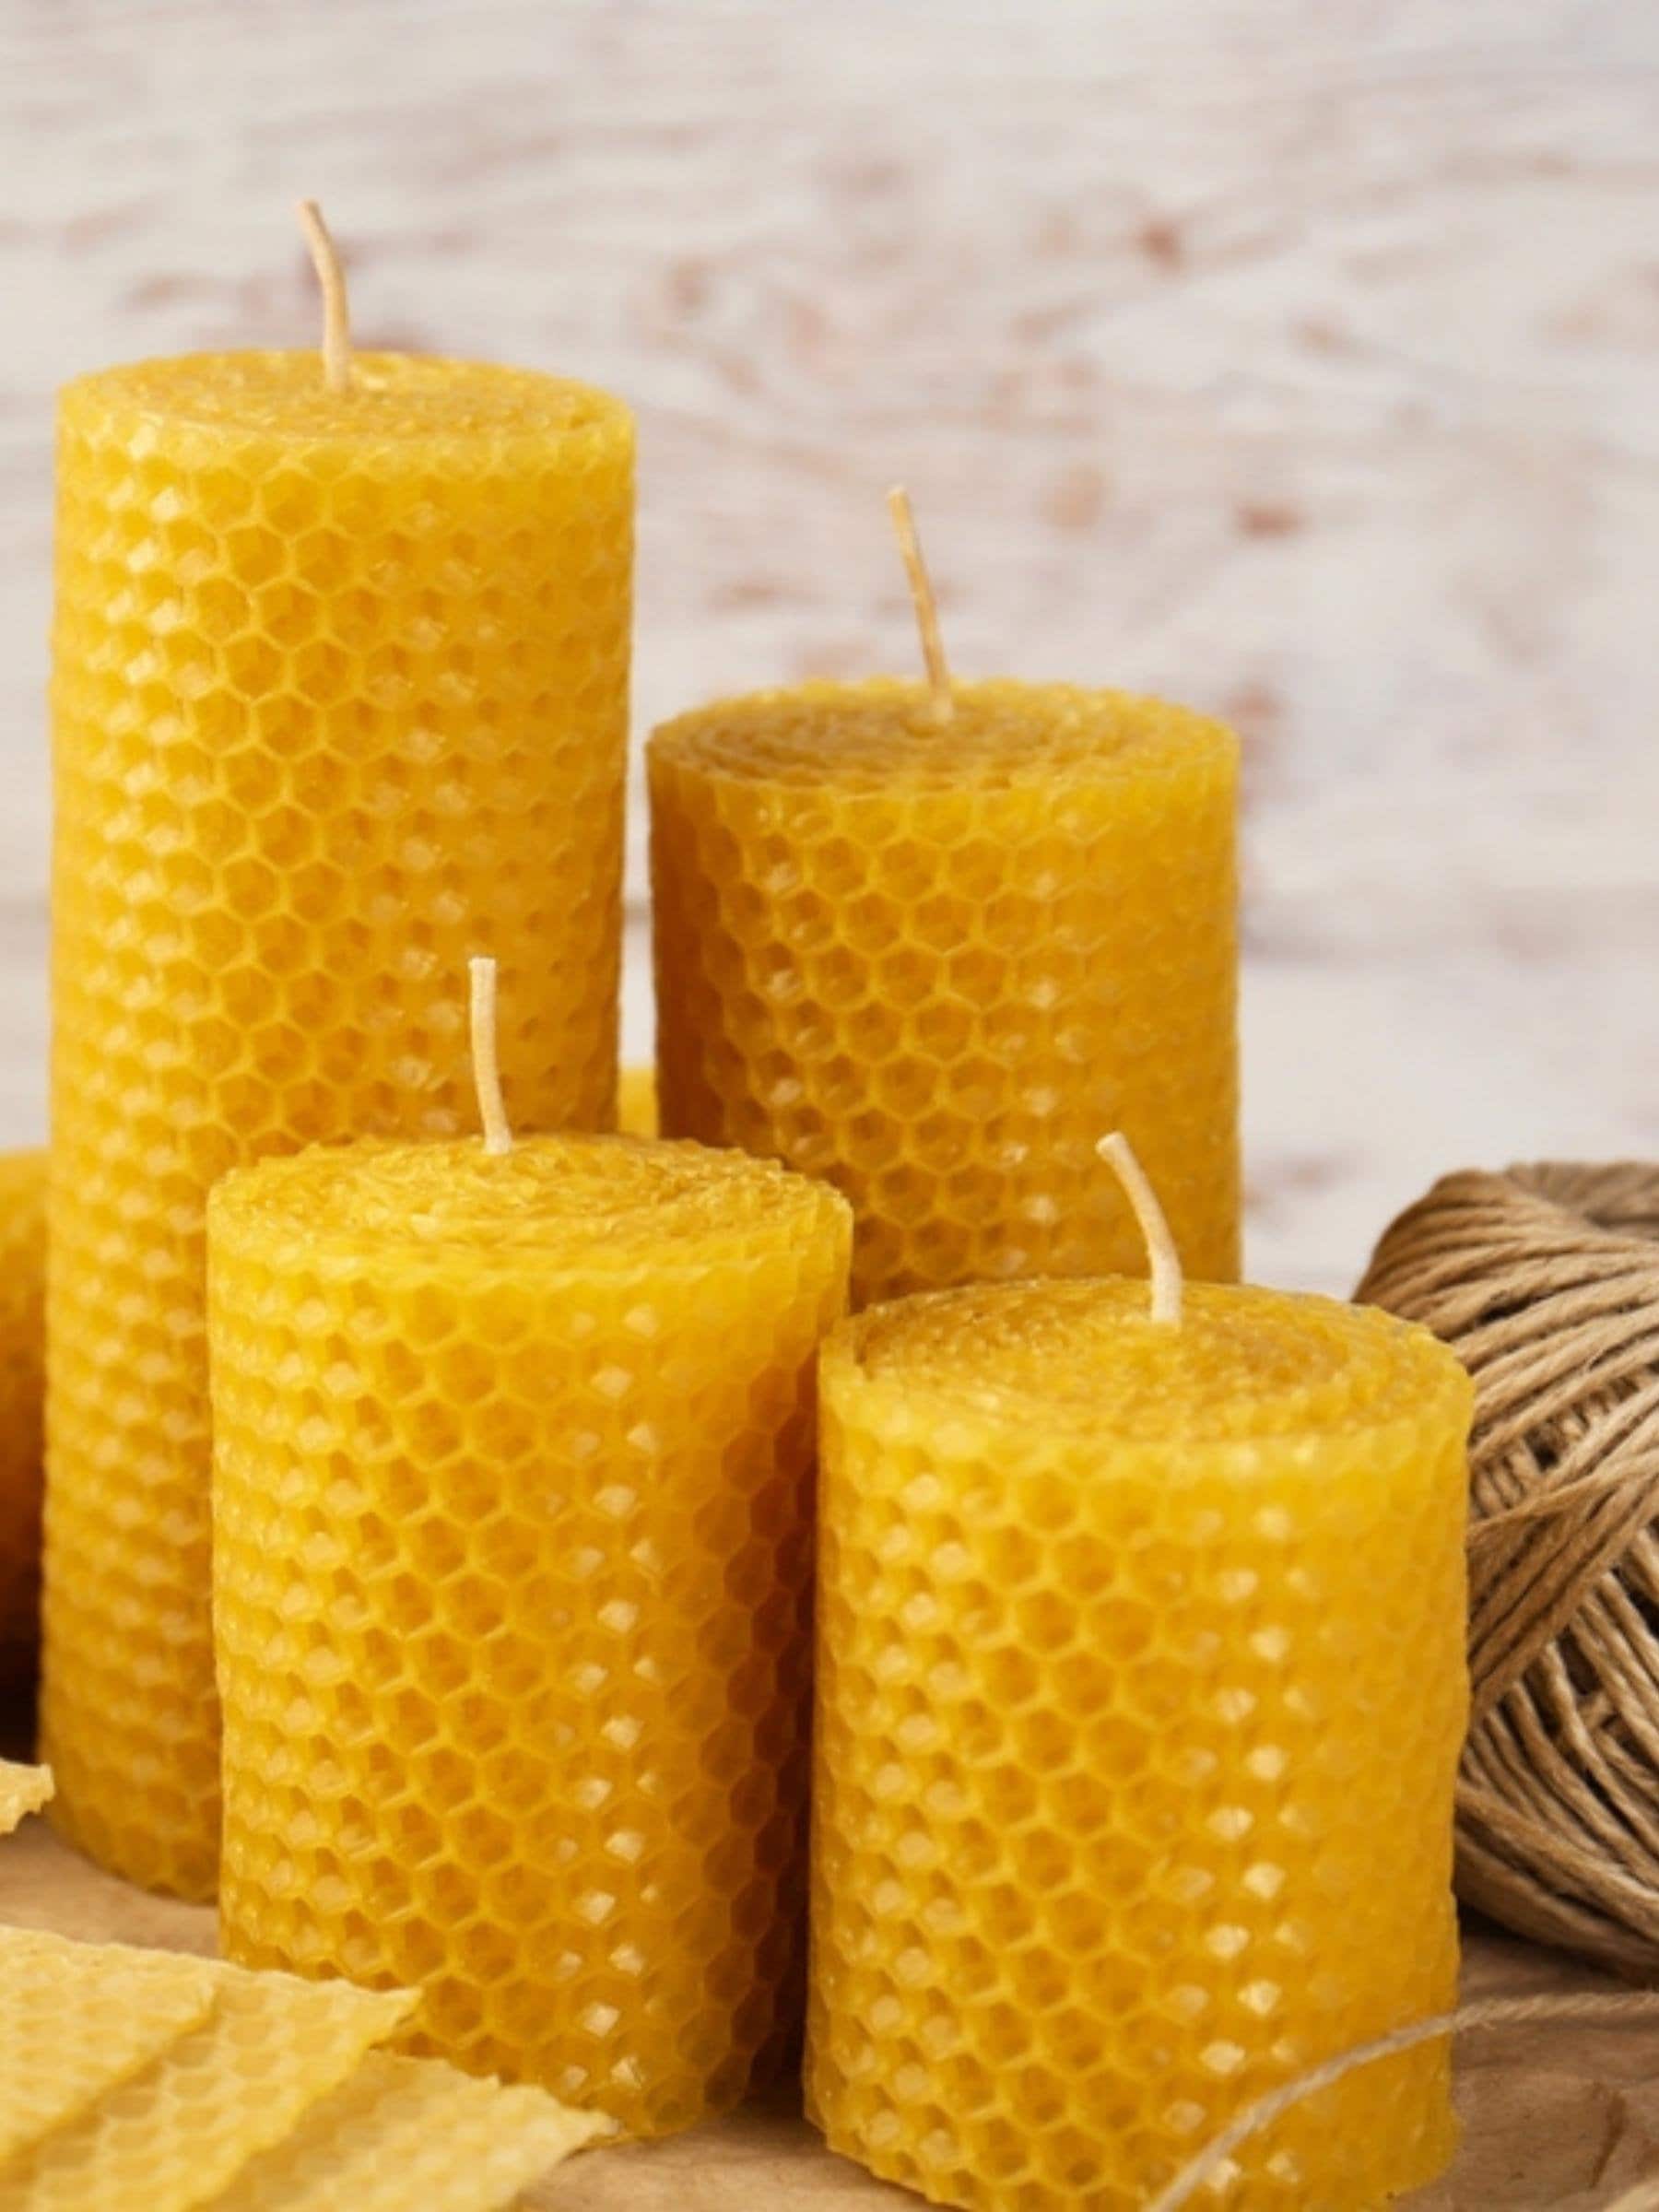 White Beeswax Pure Beeswax Yellow Beeswax Lace Candle Flower Paper Bow  Aromatherapy Mould Convenient and Durable Candle Making